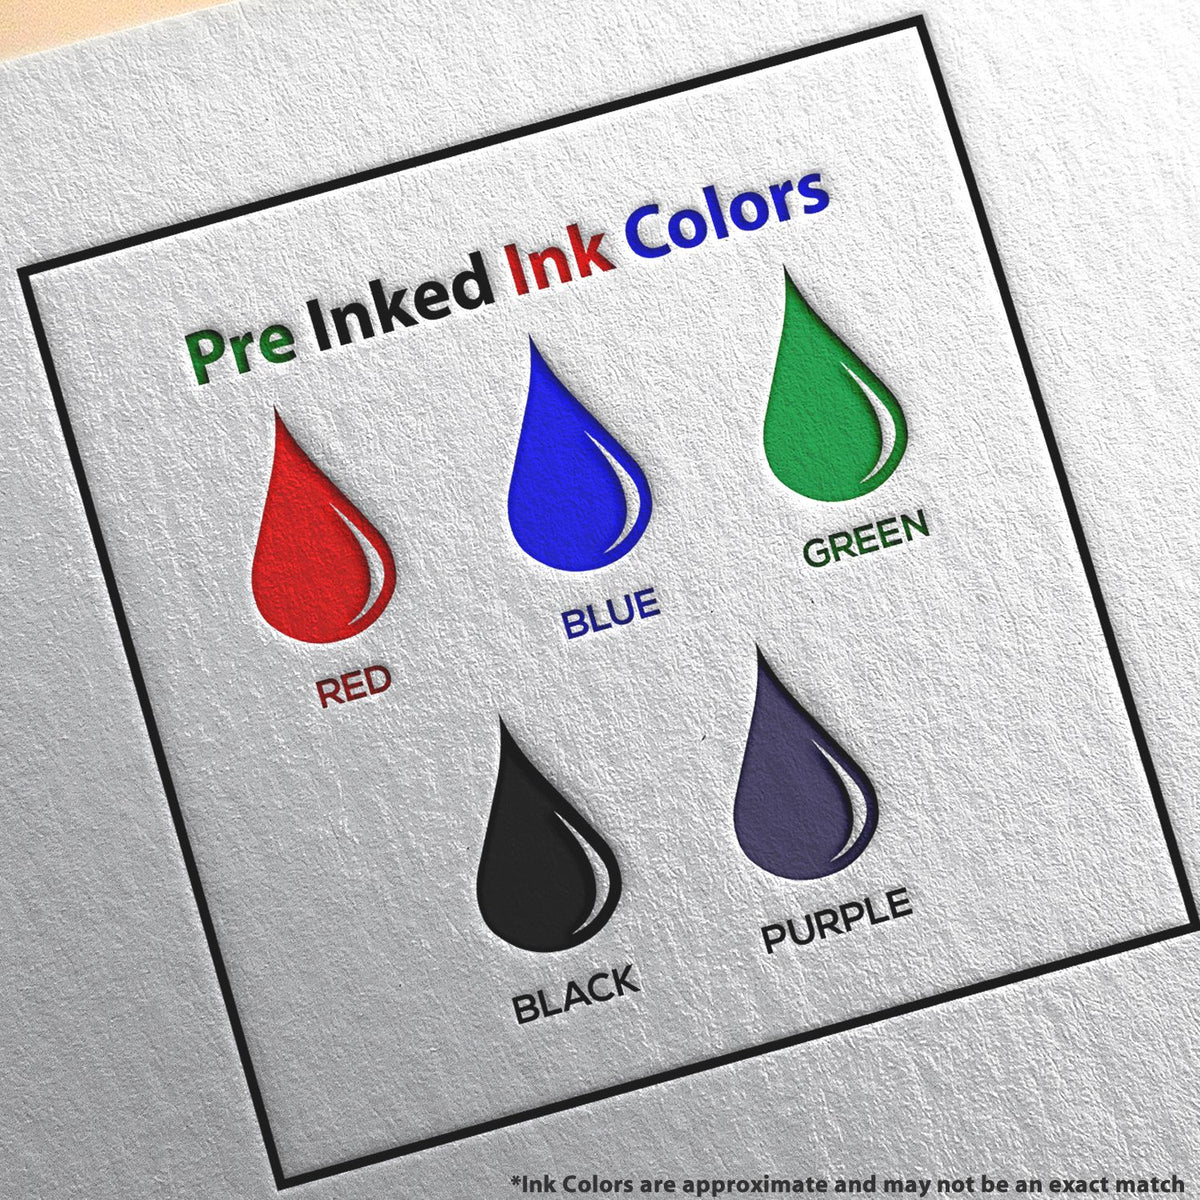 A picture showing the different ink colors or hues available for the Slim Pre-Inked Iowa Professional Engineer Seal Stamp product.